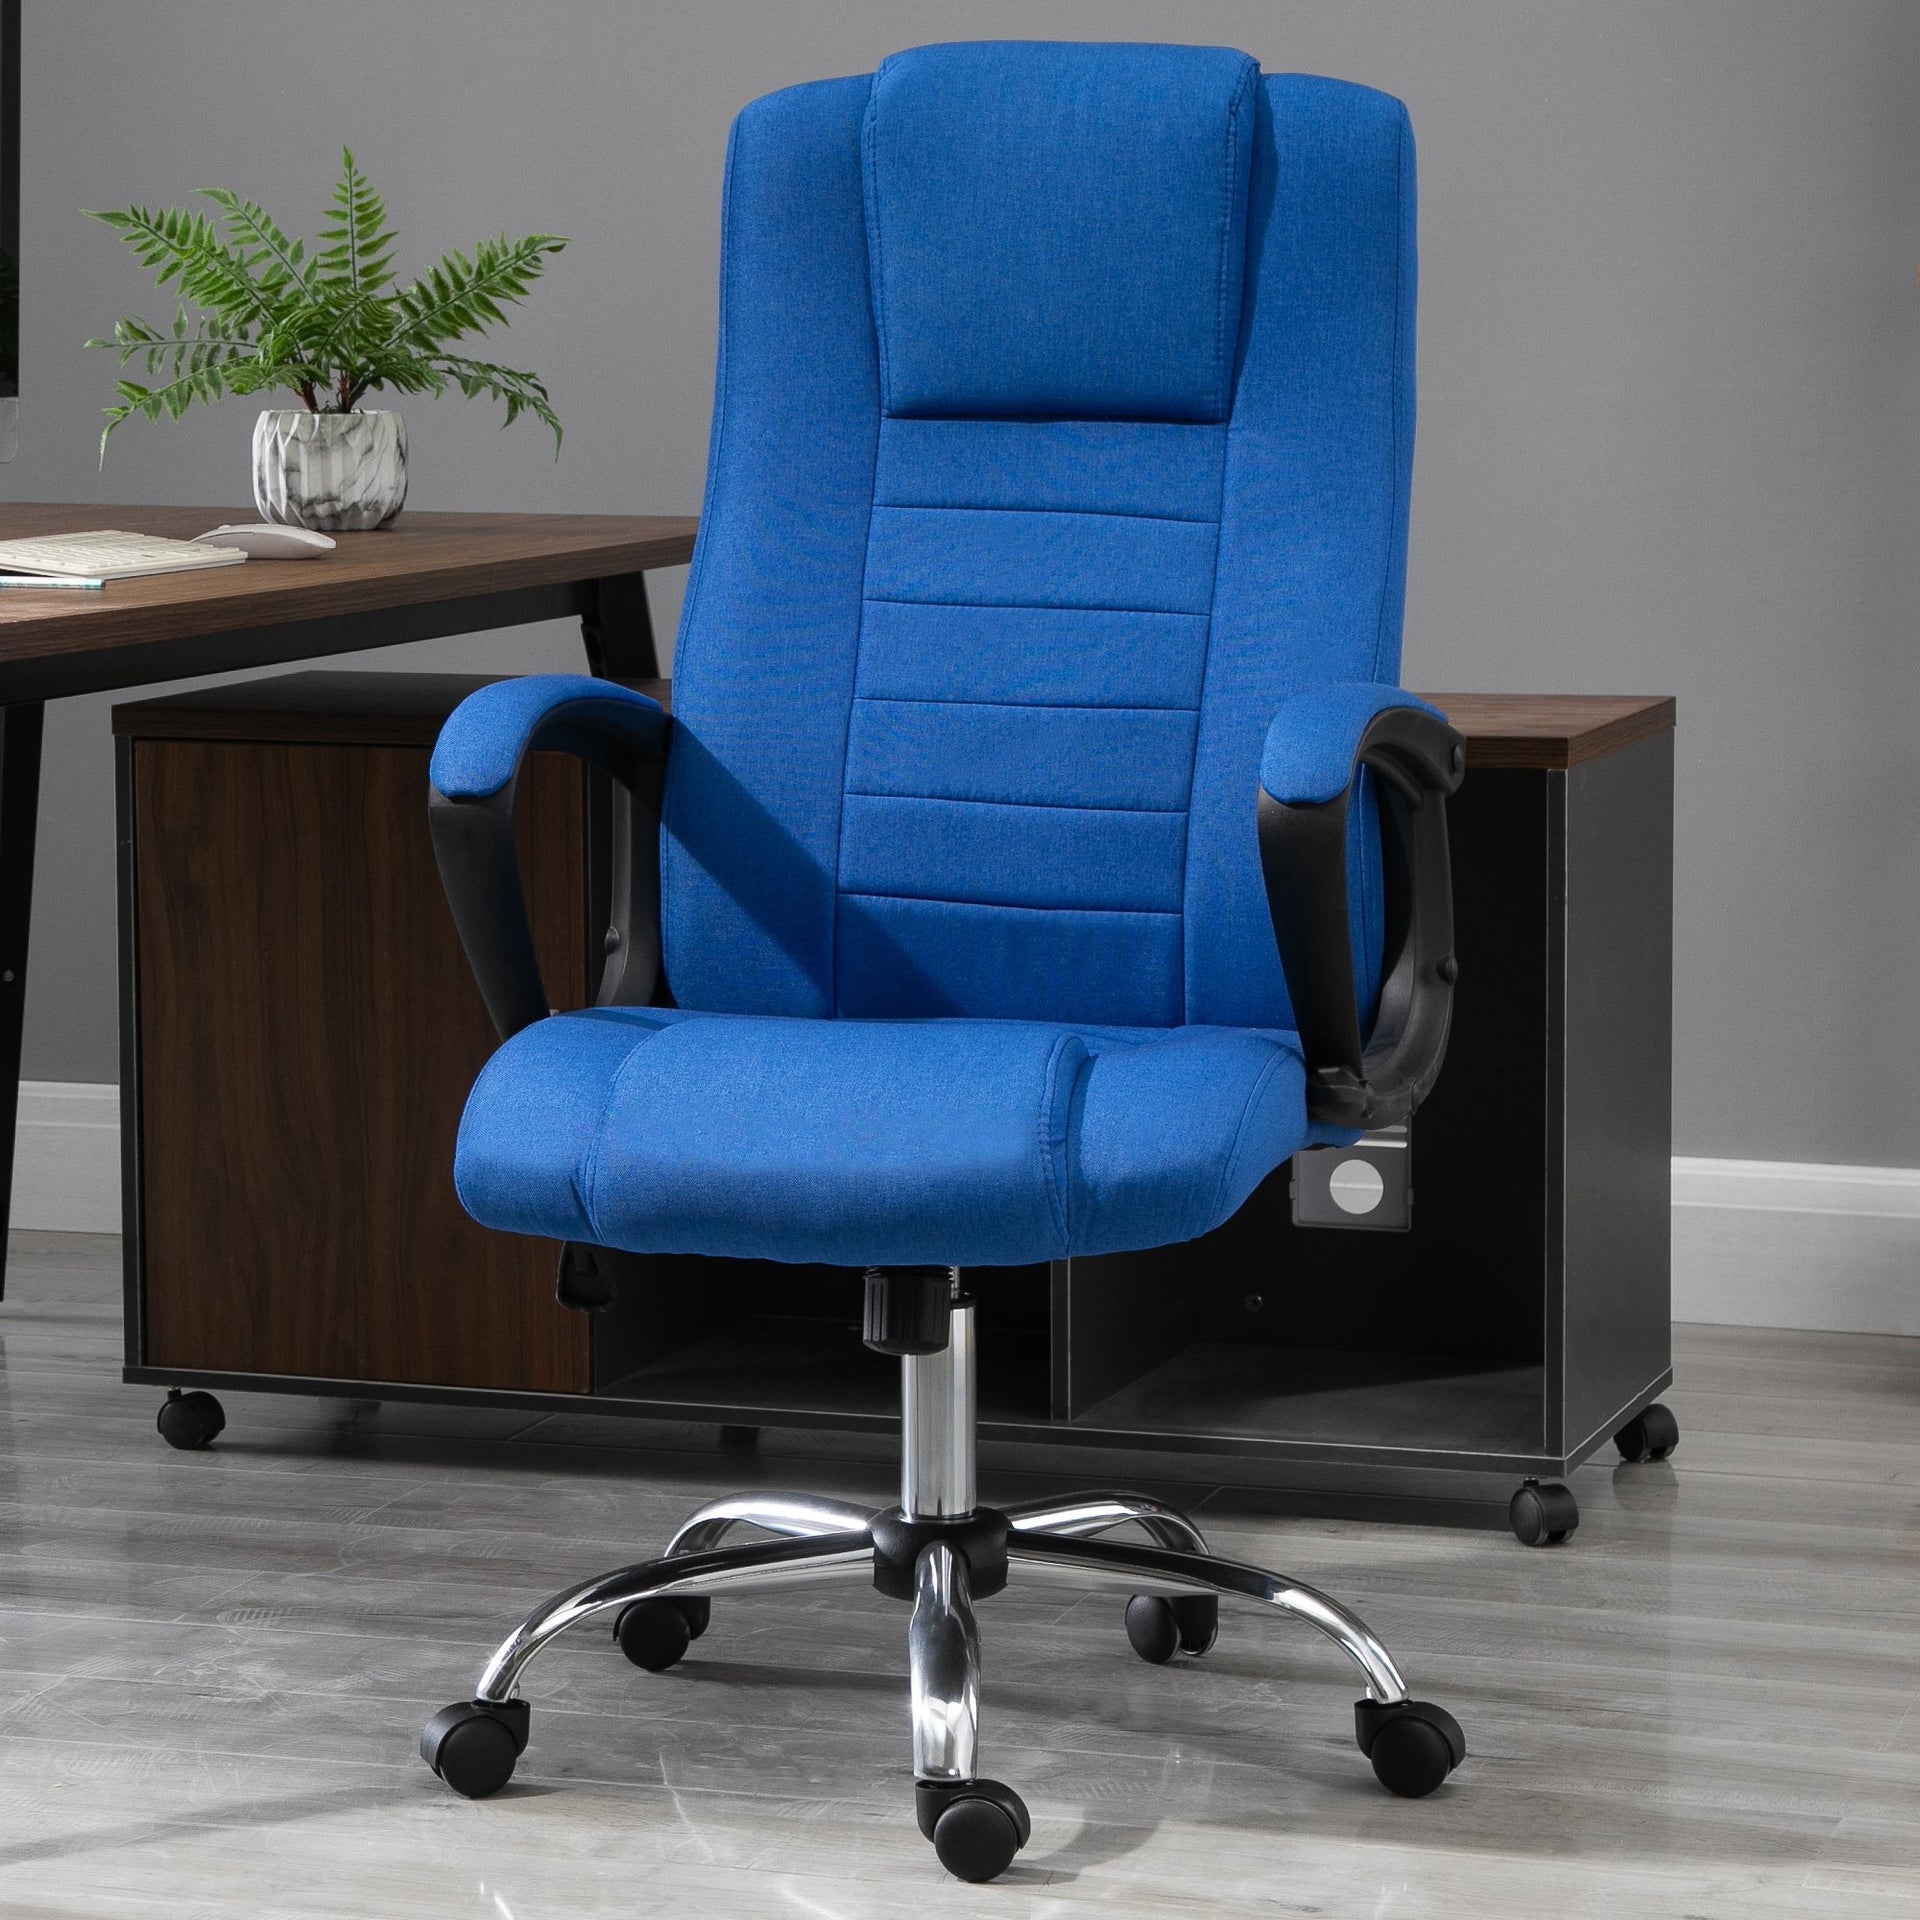 Vinsetto Home Office Chair 360 Degree Swivel Chair Adjustable Height